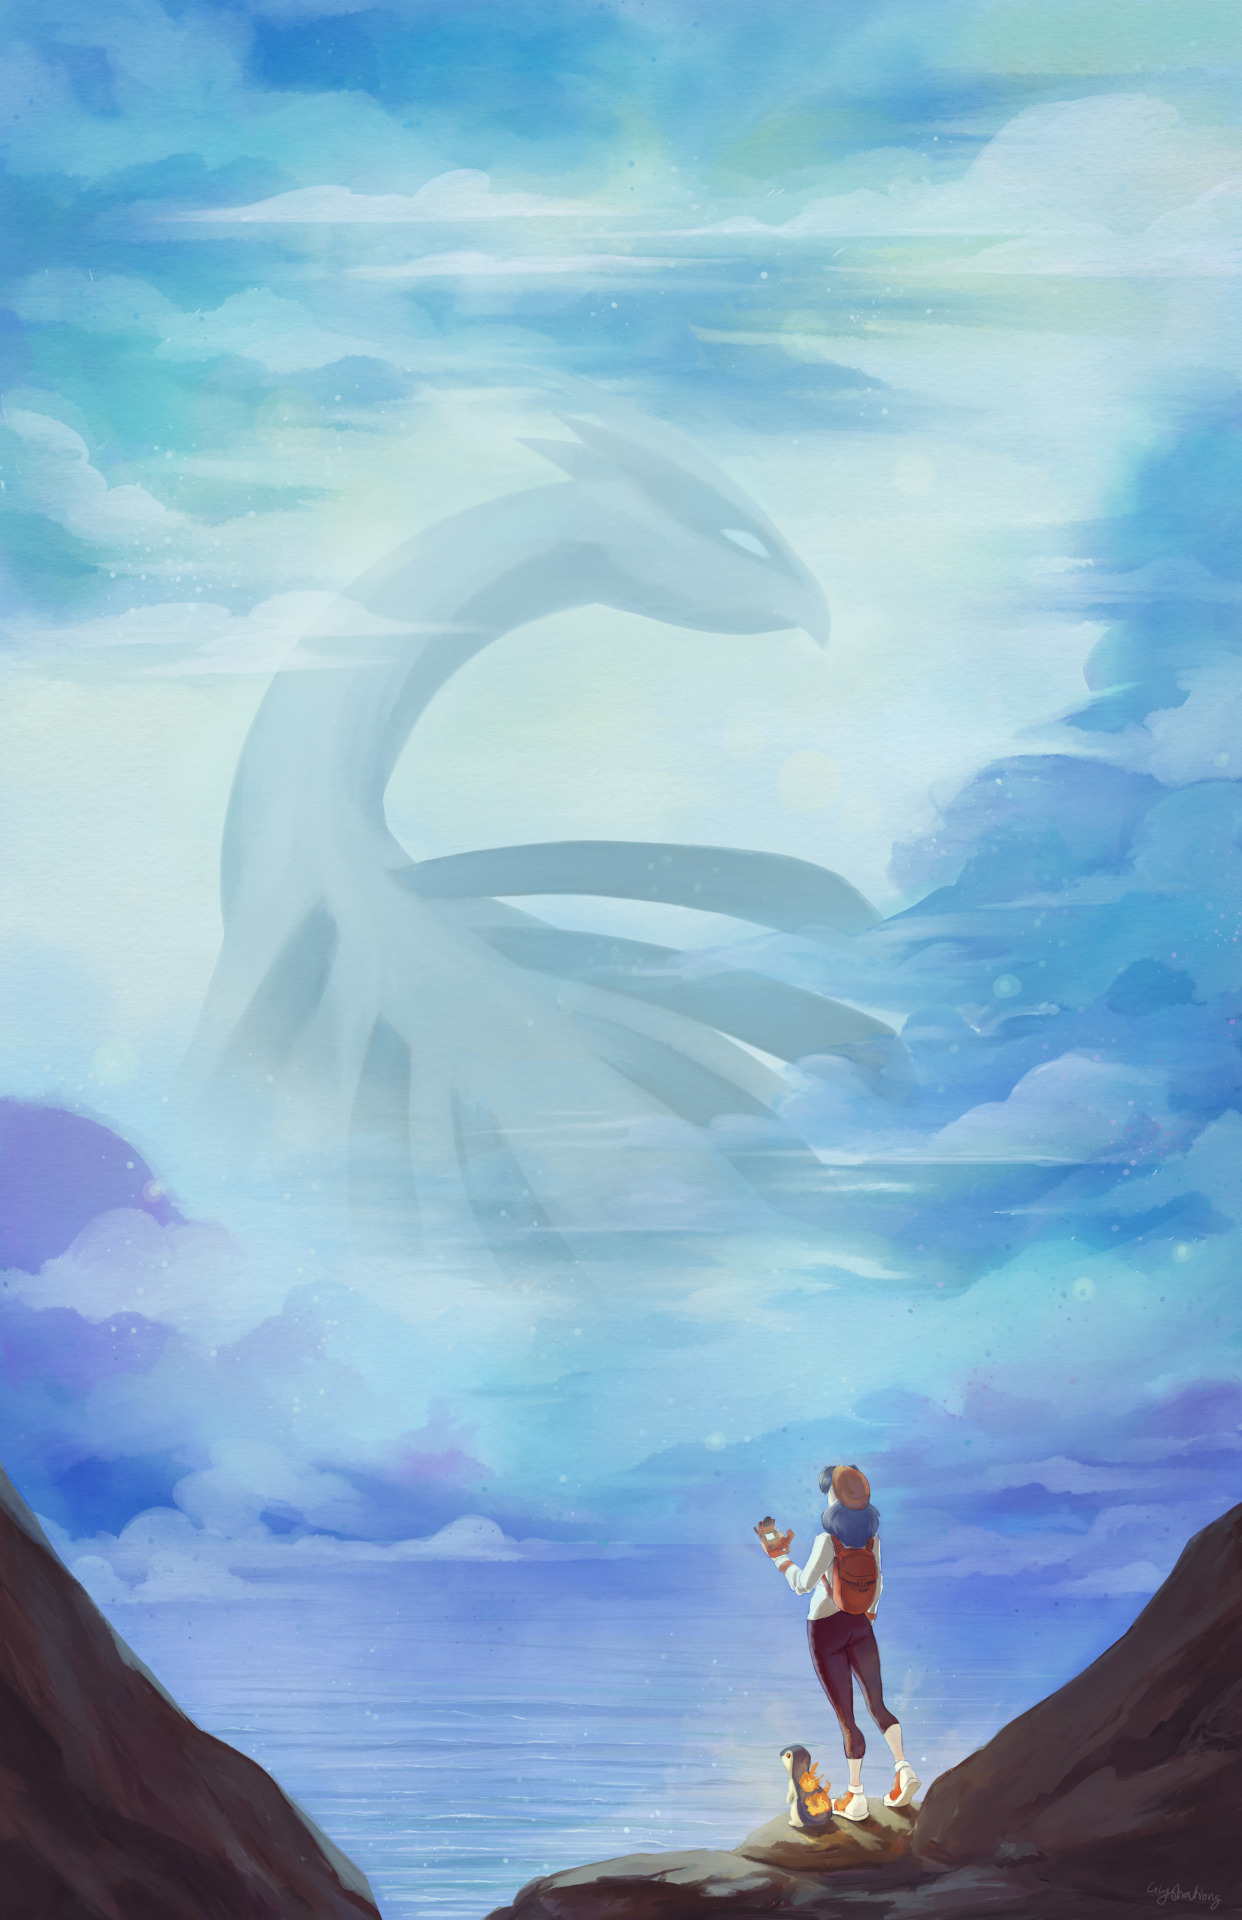 Forever my favorite legendary, and also my favorite movie of the whole bunch. Lugia my boy!